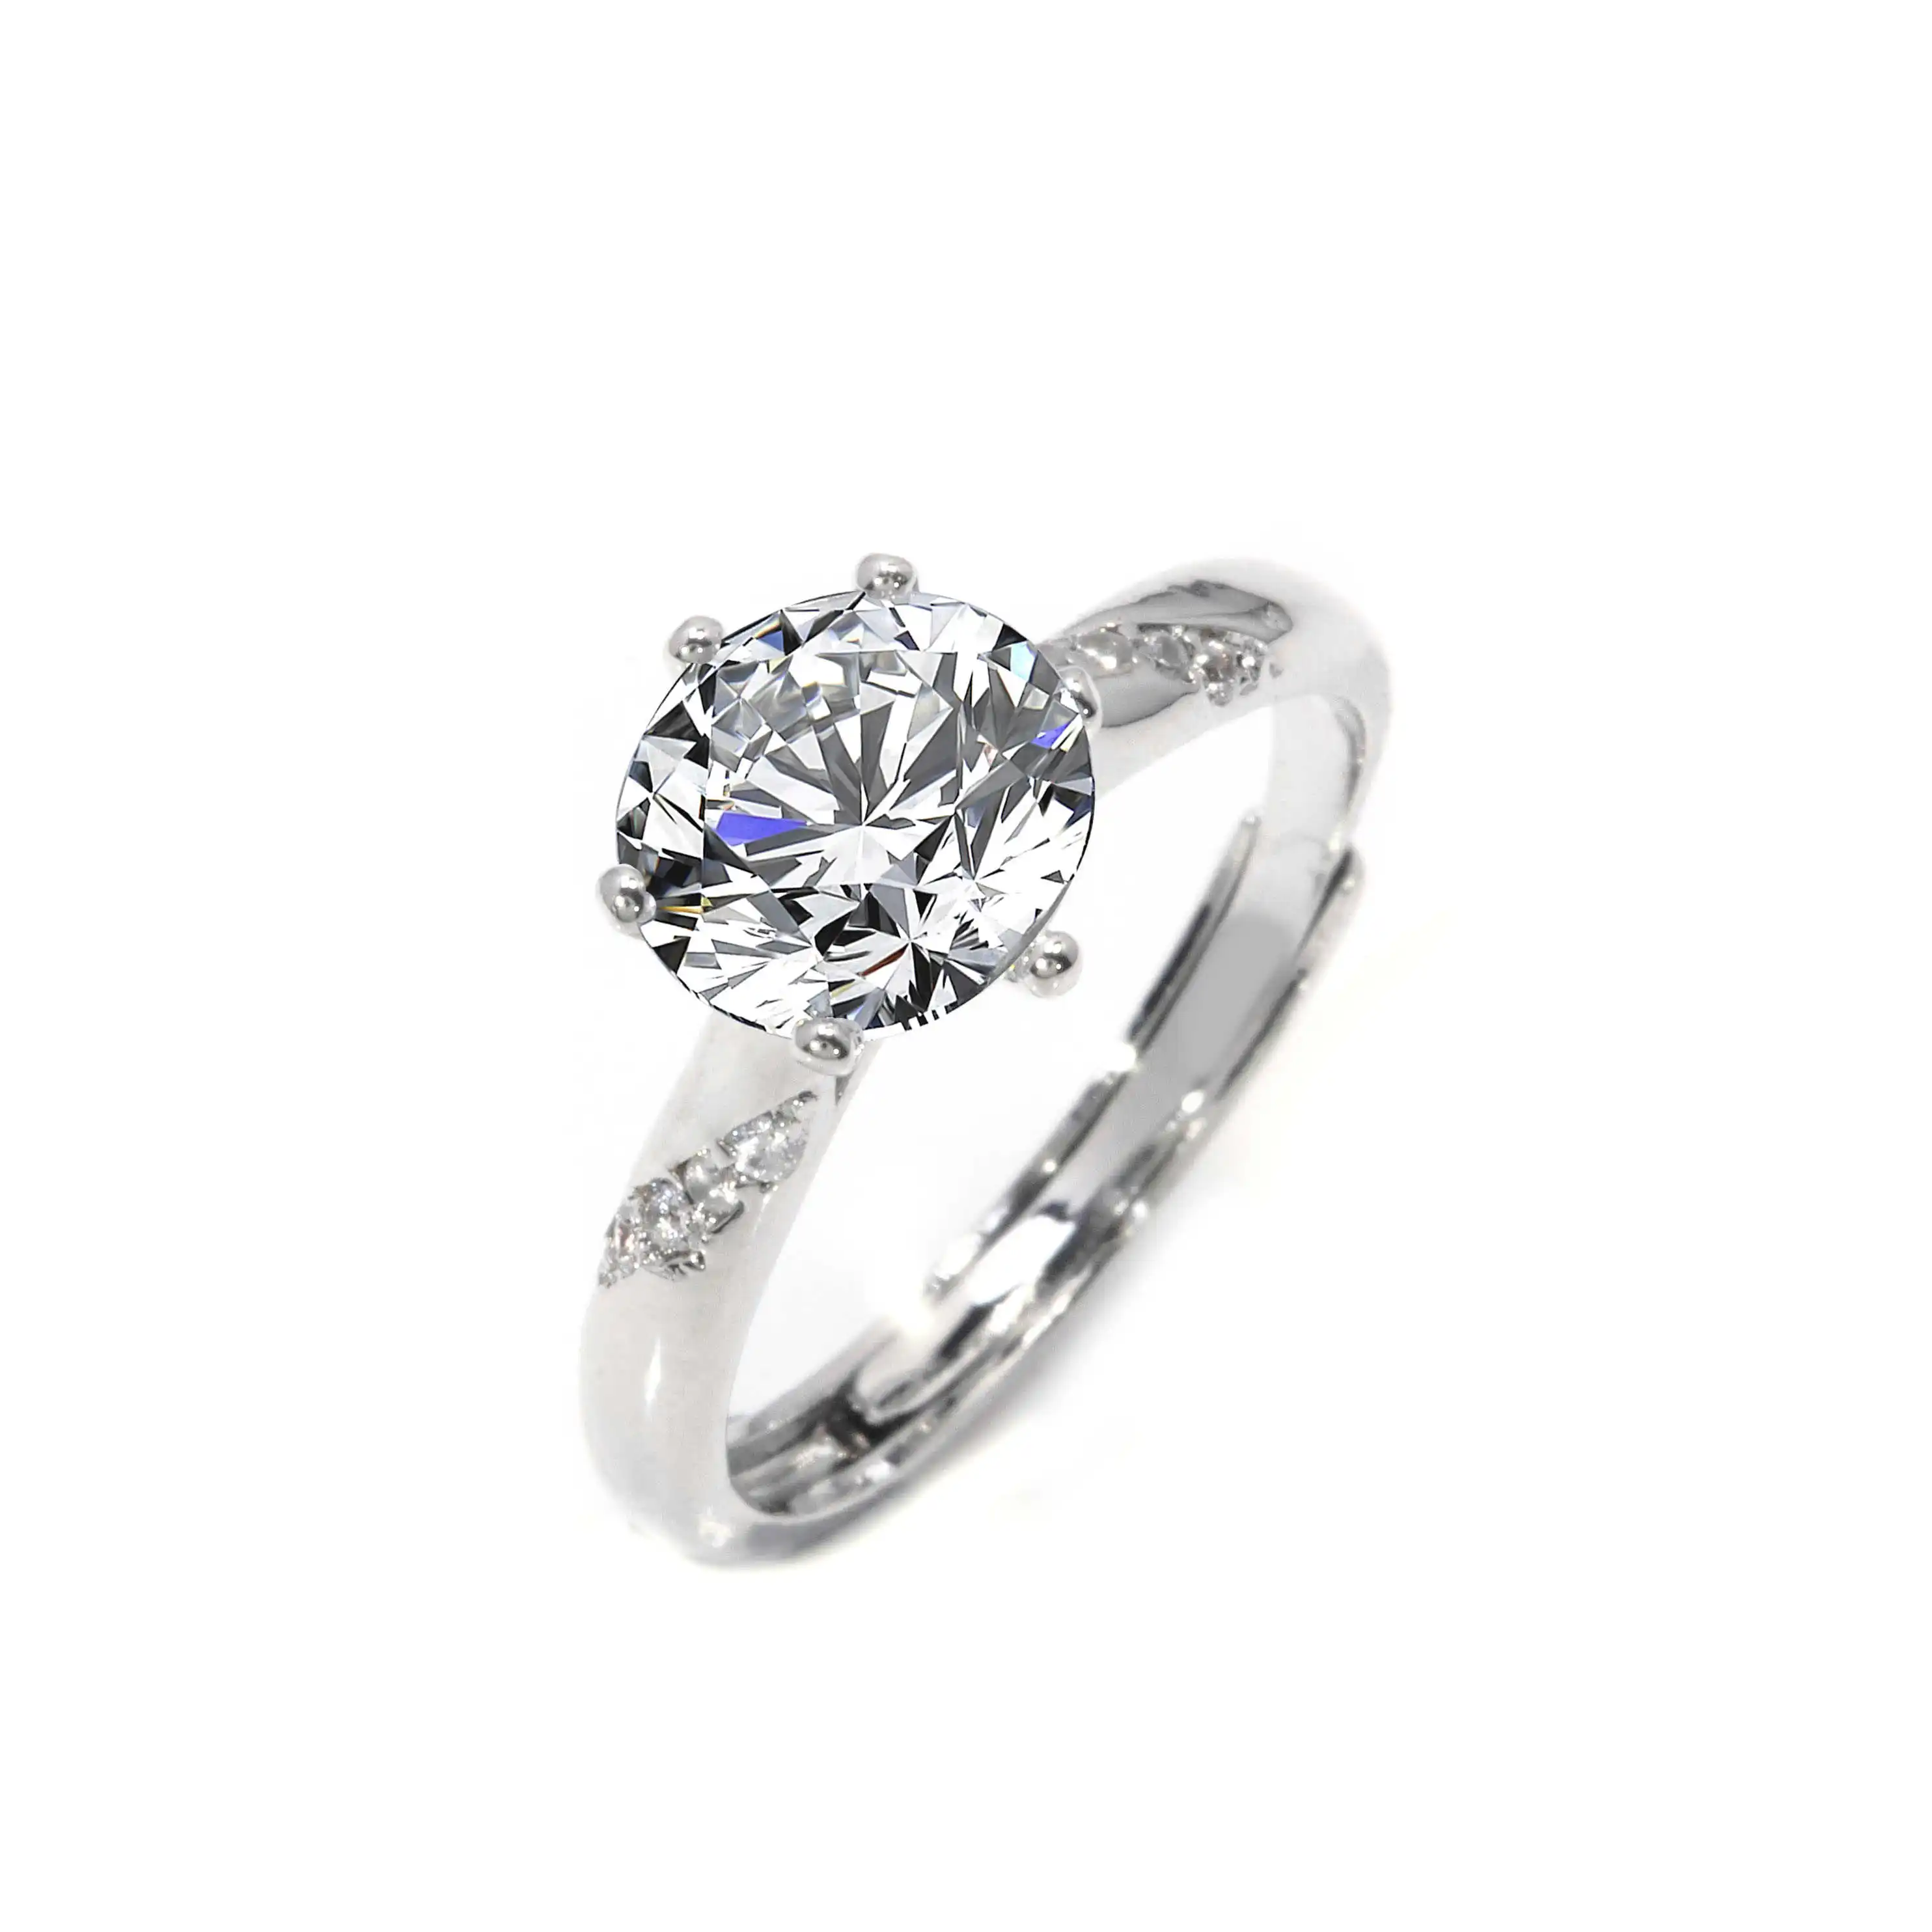 

Fashion Classic Moissanite Diamond Ring Sterling Silver S925 One Carat Round Cut Moissanite Ring